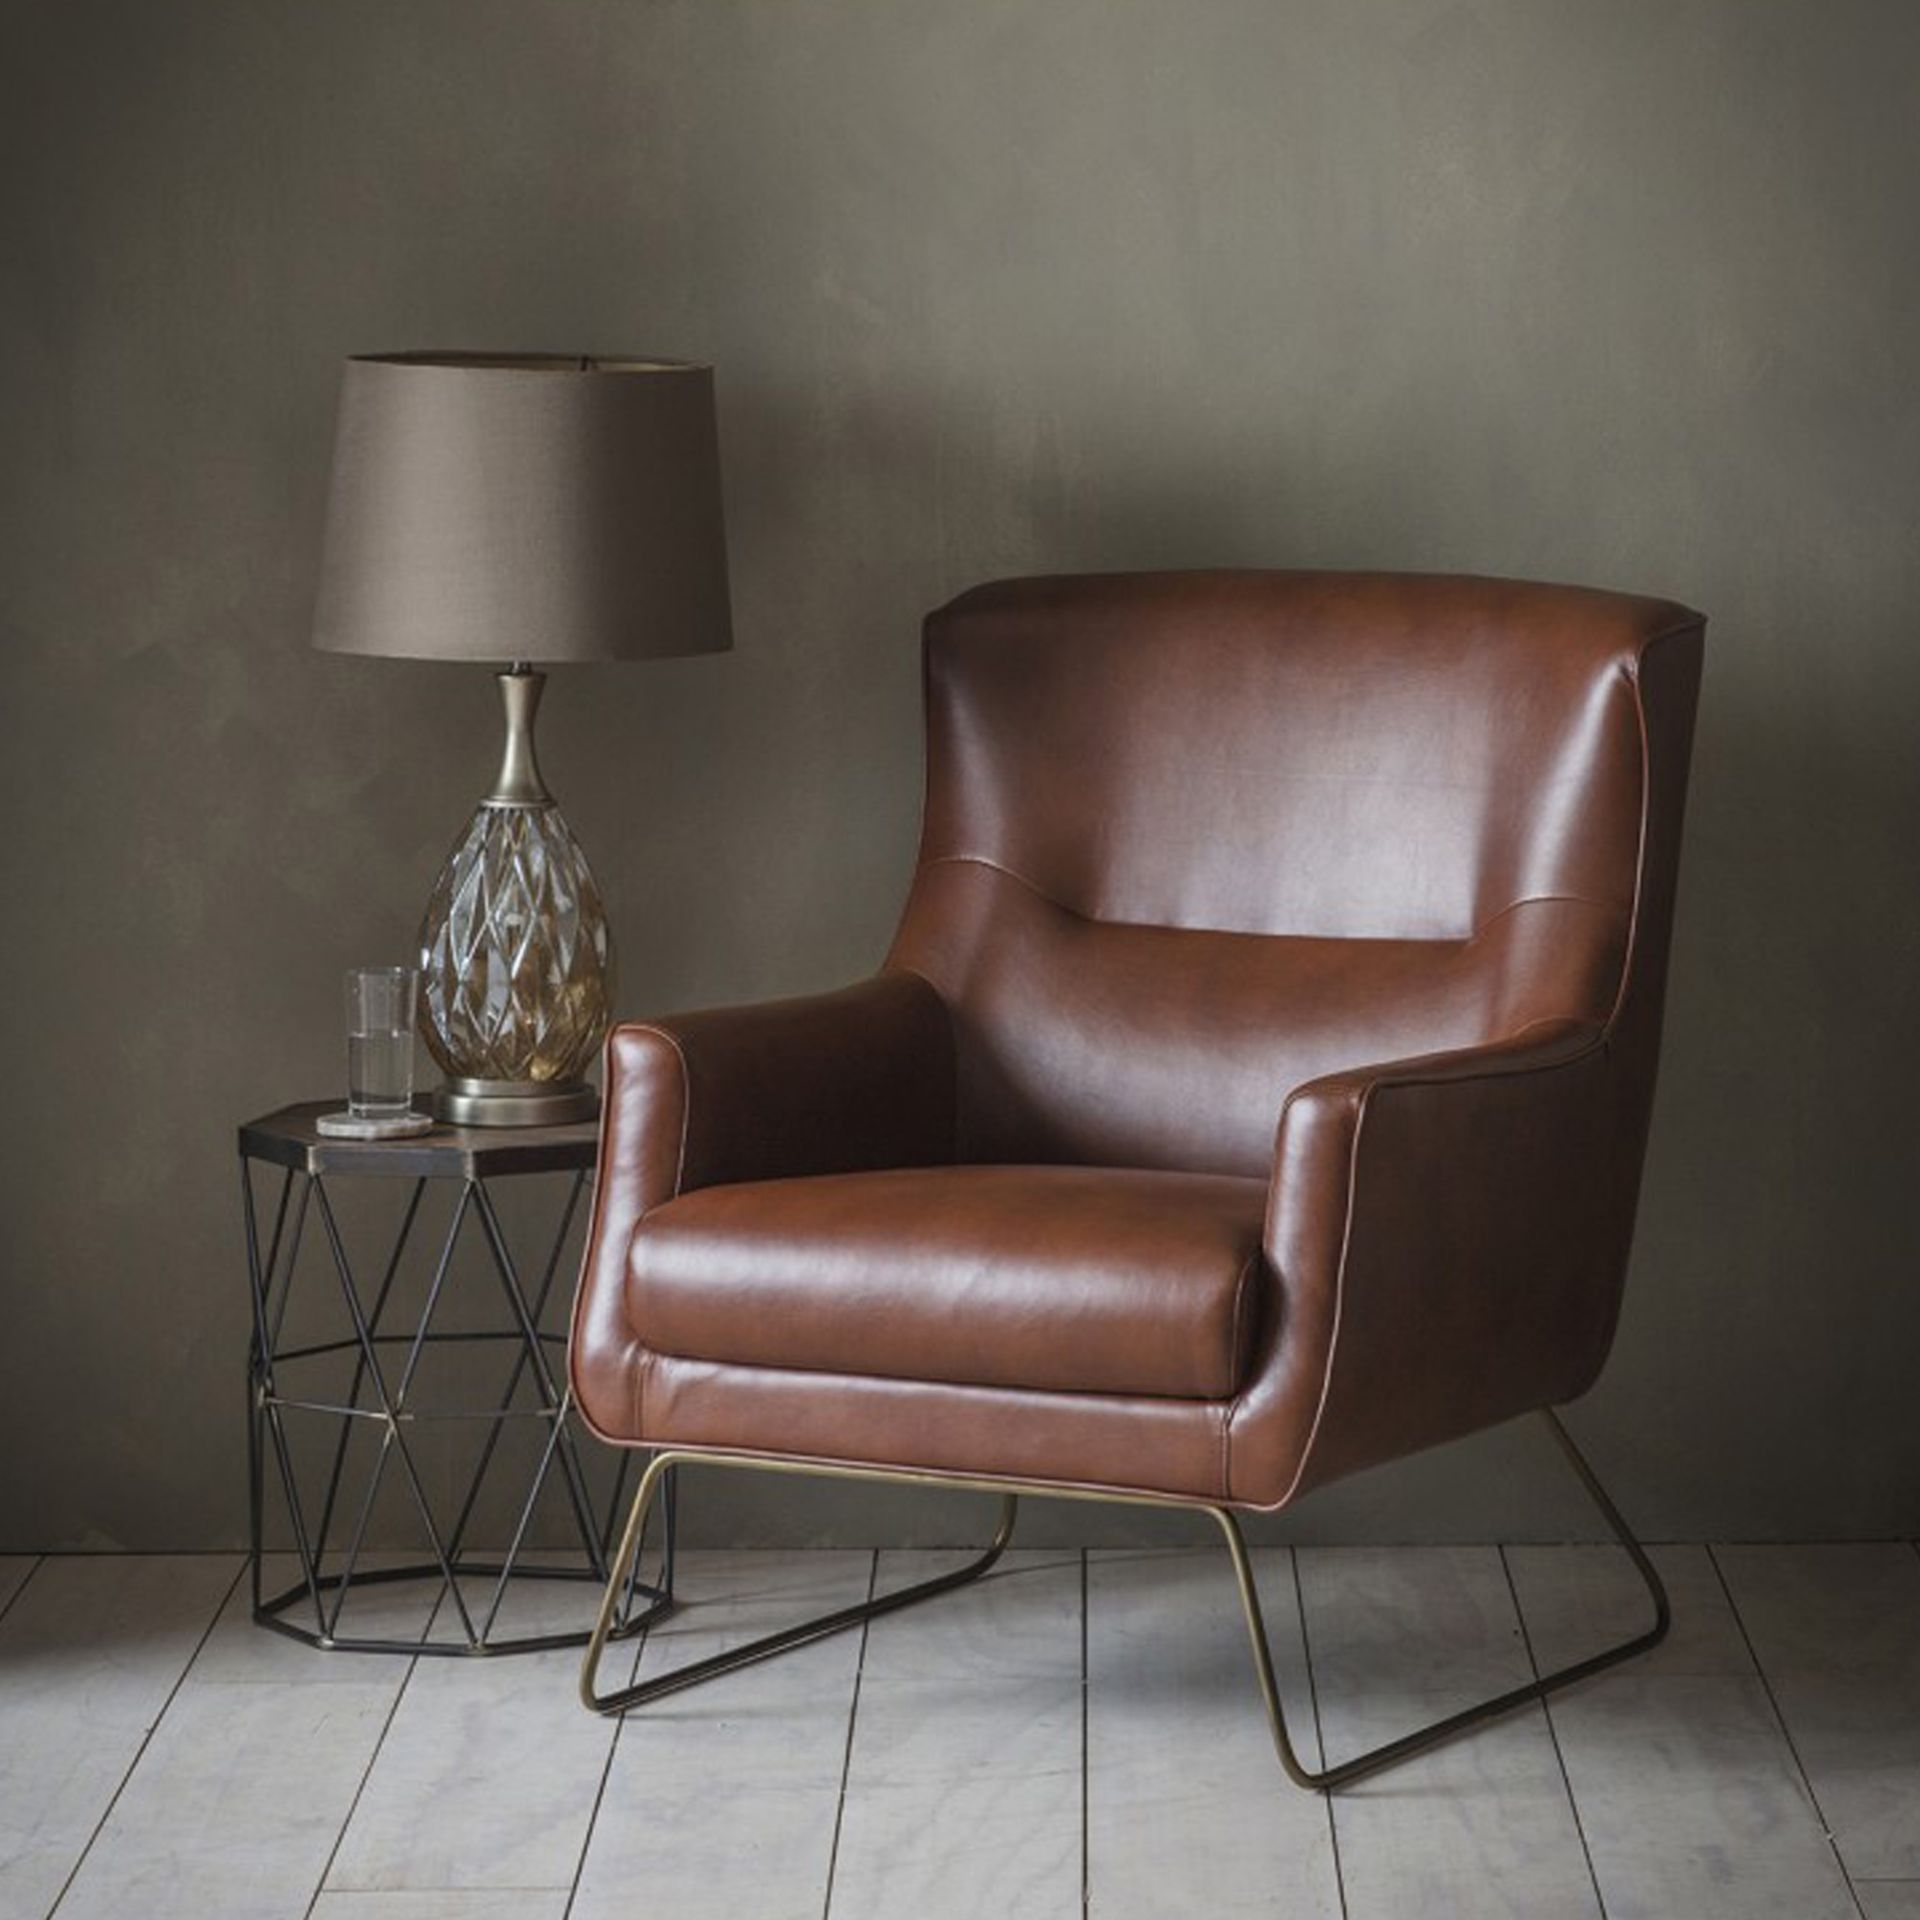 Camberley Lounge Chair Here Is A Stunning Brand New Lounge Chair In A Matt Saddle Brown Leather